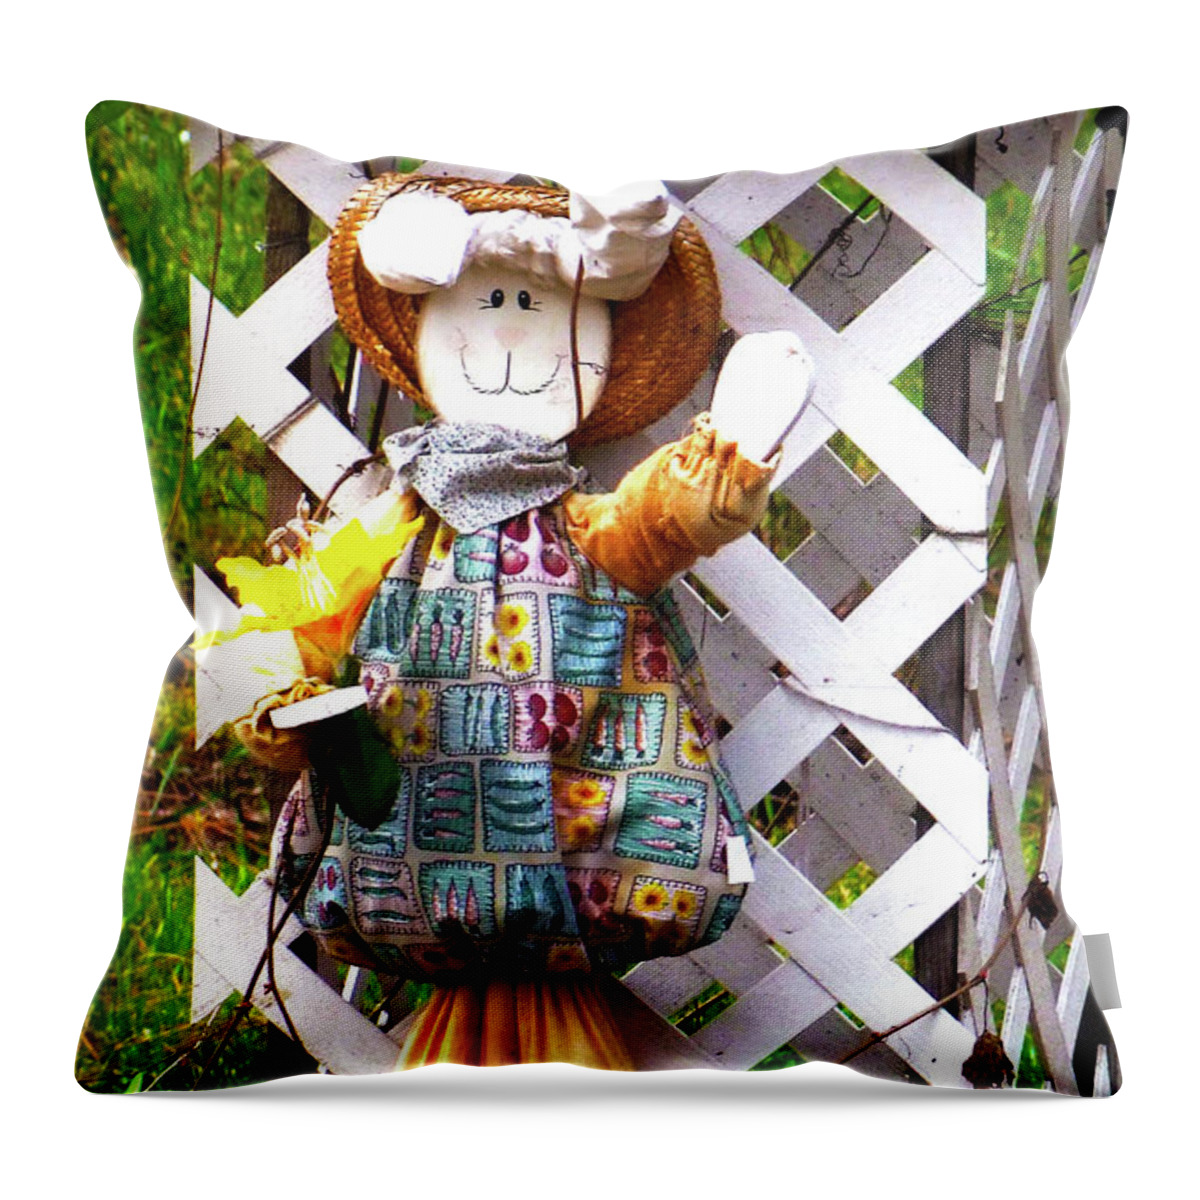 Doll Rag Radoll Throw Pillow featuring the photograph Rag doll by Ron Roberts